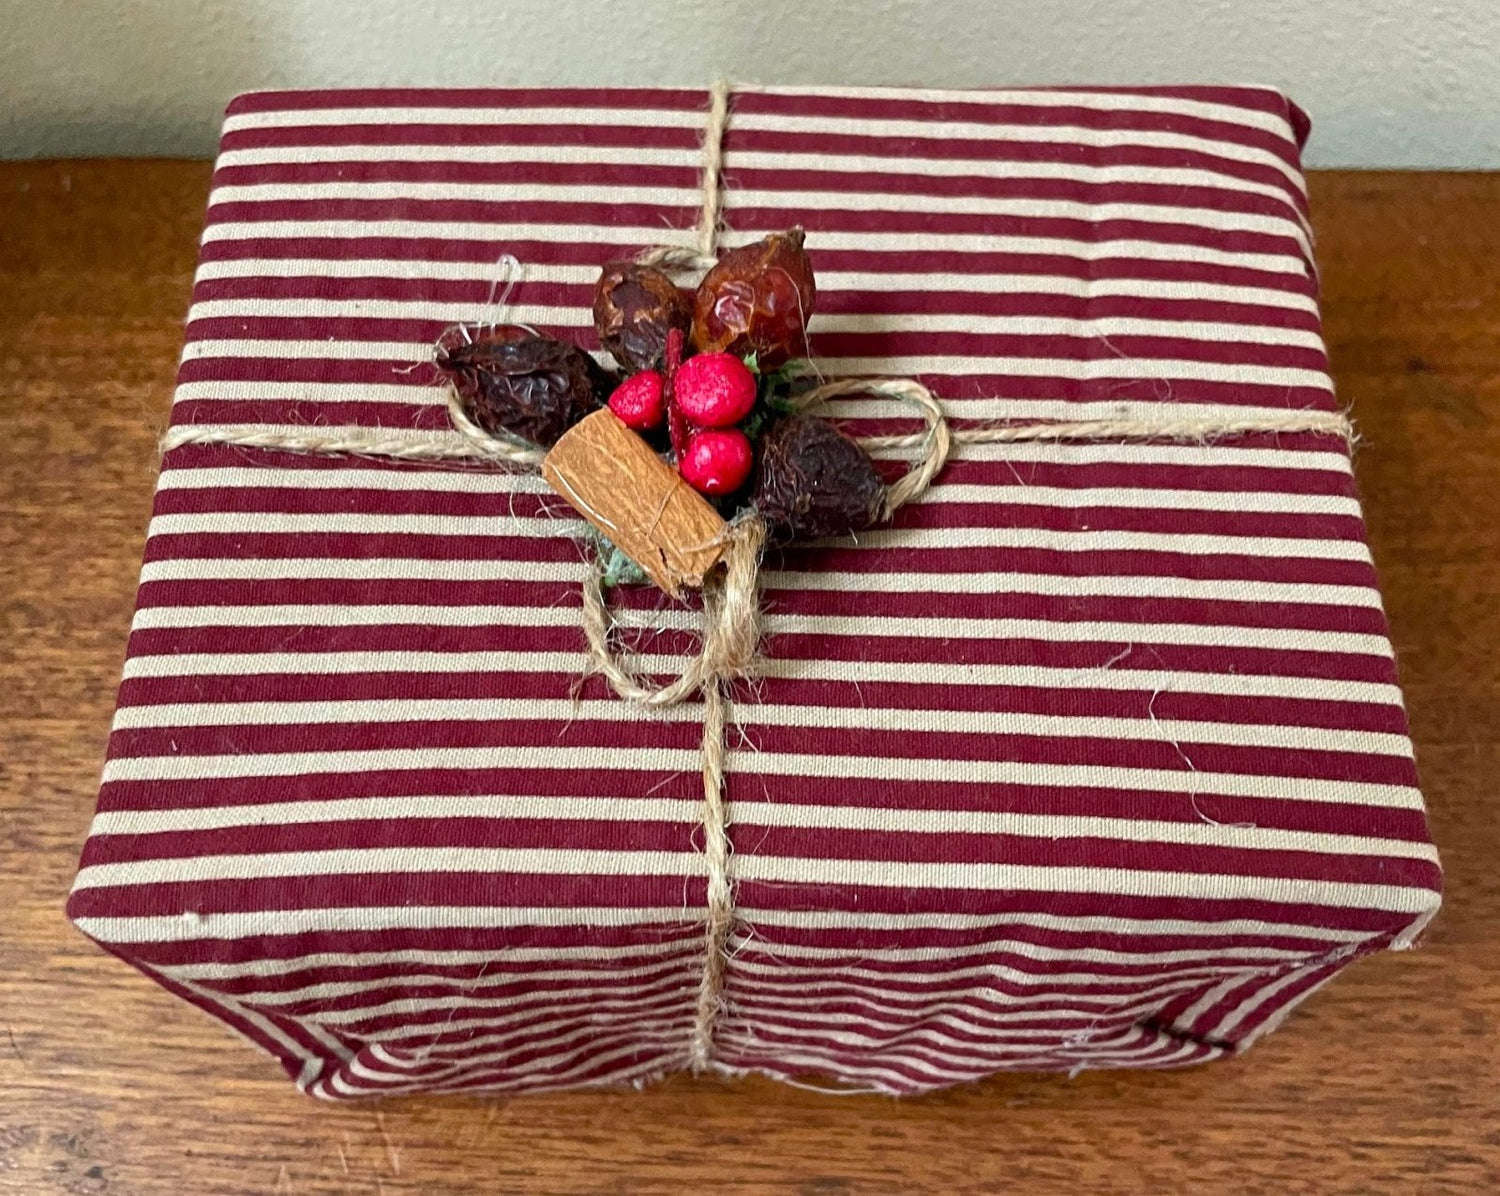 Primitive Colonial Handcrafted Red Striped Fabric Christmas Gift Box Display - The Primitive Pineapple Collection